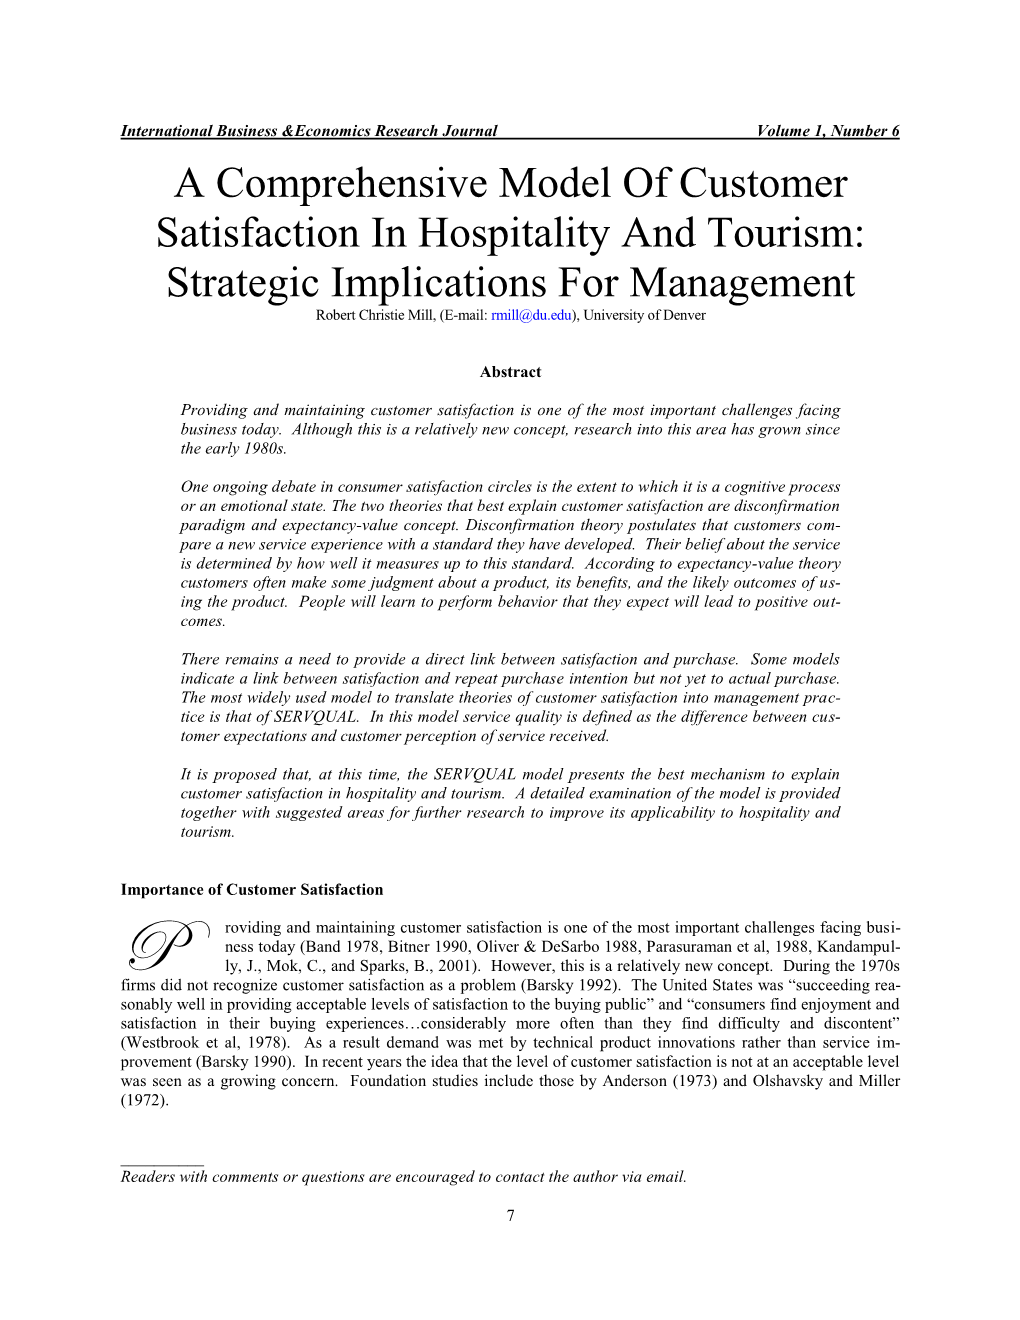 A Comprehensive Model of Customer Satisfaction in Hospitality and Tourism